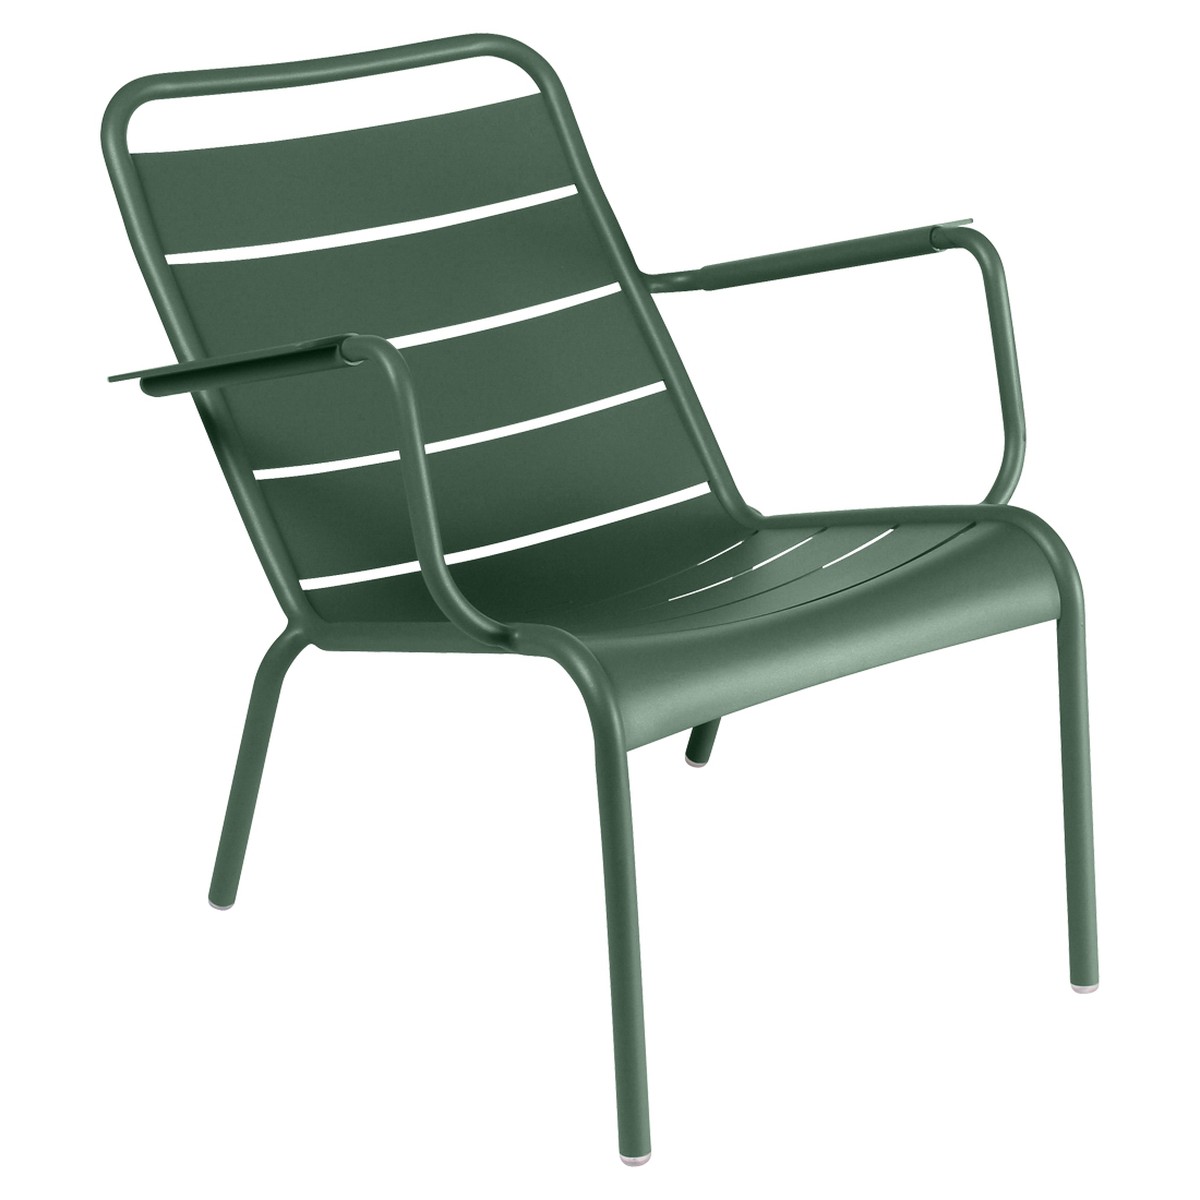 Fermob Luxembourg Fauteuil bas Luxembourg Vert sapin L 70 x l 86 x H72cm